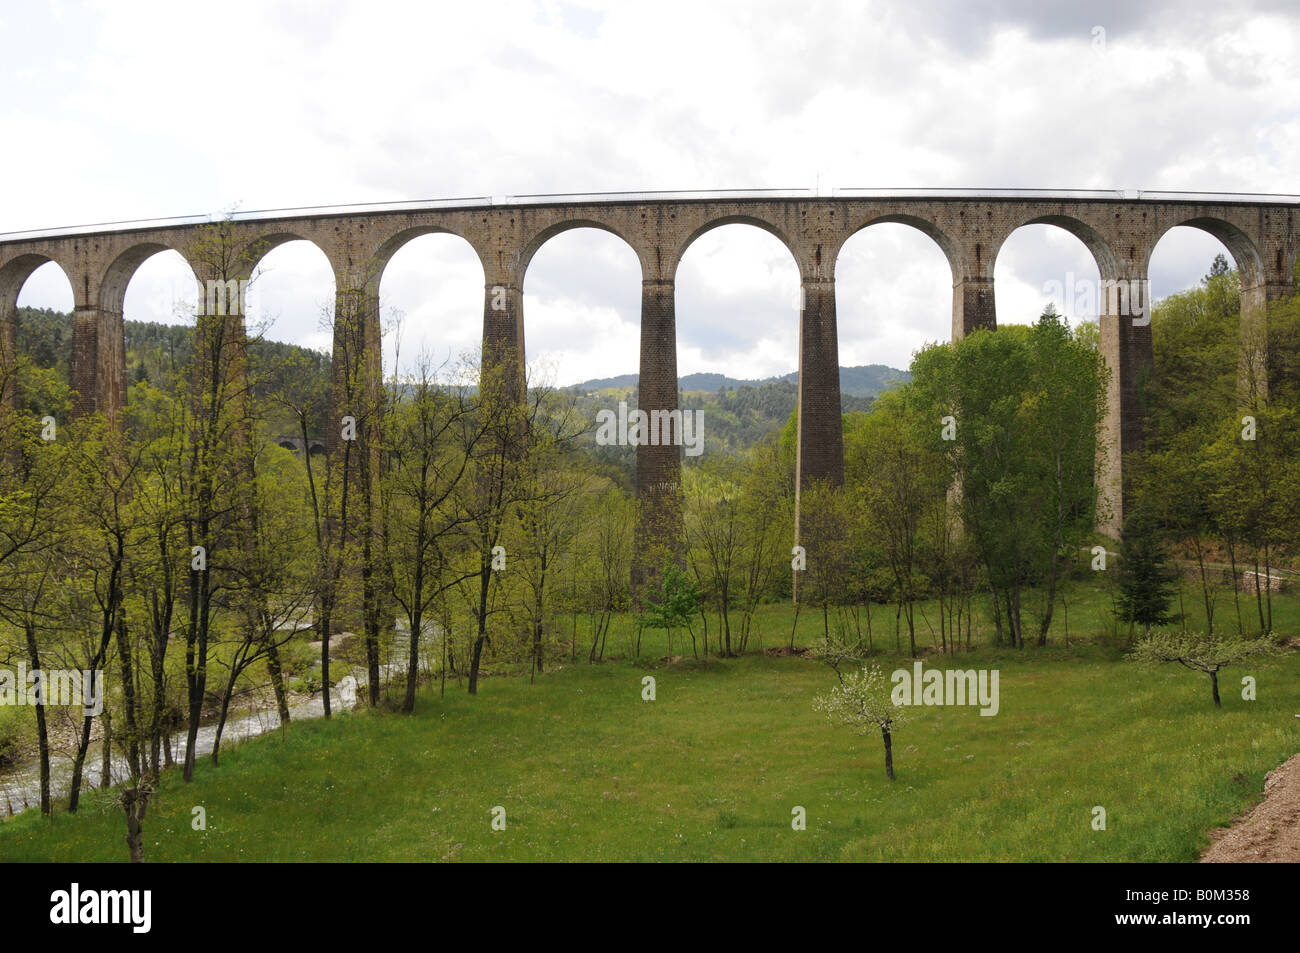 The Viaduct du Luech at Chamborigaud in the Cevennes region of the south of France. It is 46 metres high, 360 long, has 29 arches and is still in use. Stock Photo